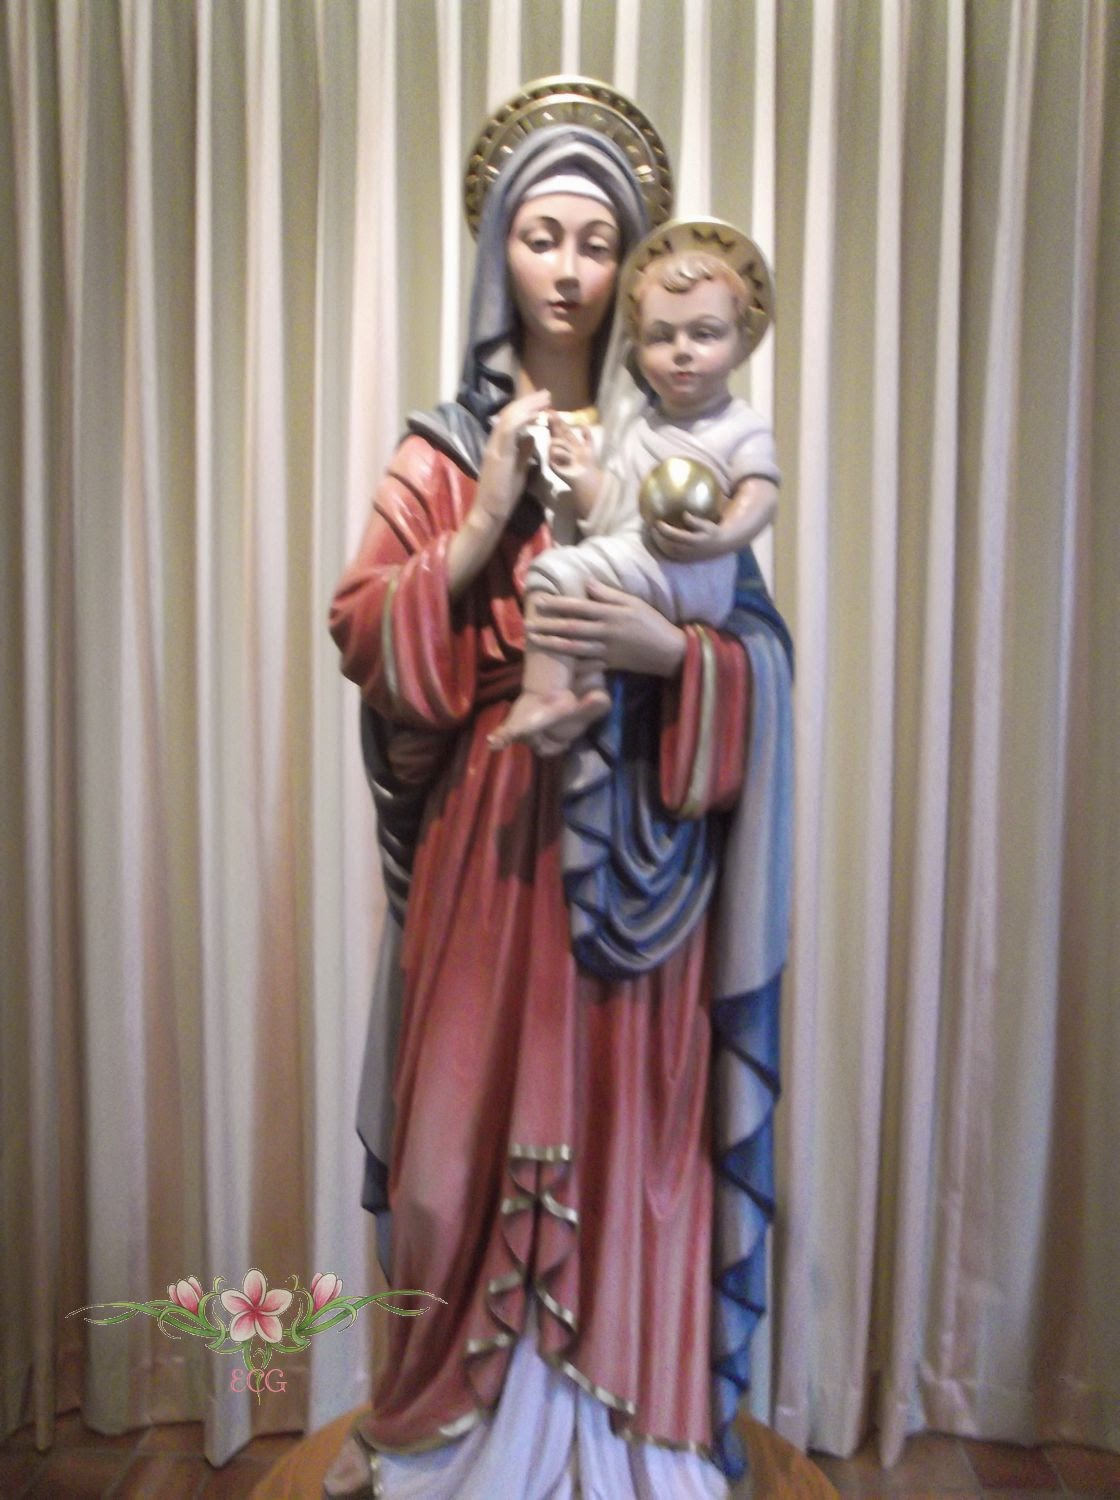 A Catholic Mom in Hawaii: PRAYER TO OUR LADY OF THE BLESSED SACRAMENT